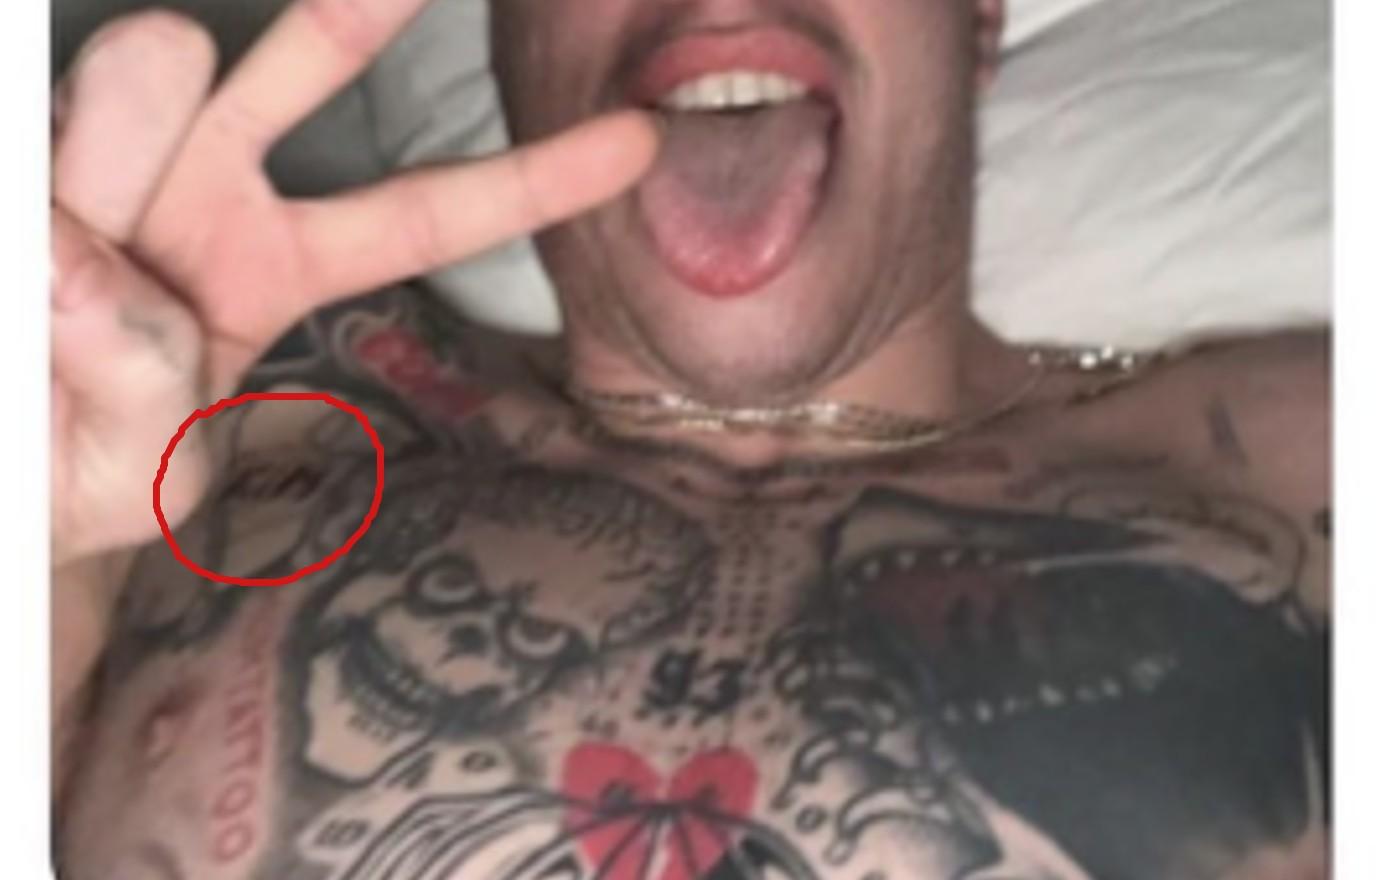 Kim Kardashians BF Pete Davidson Takes It Up A Notch With What Appears To  Be A Tattoo Of Kanye West  Her Kids Name